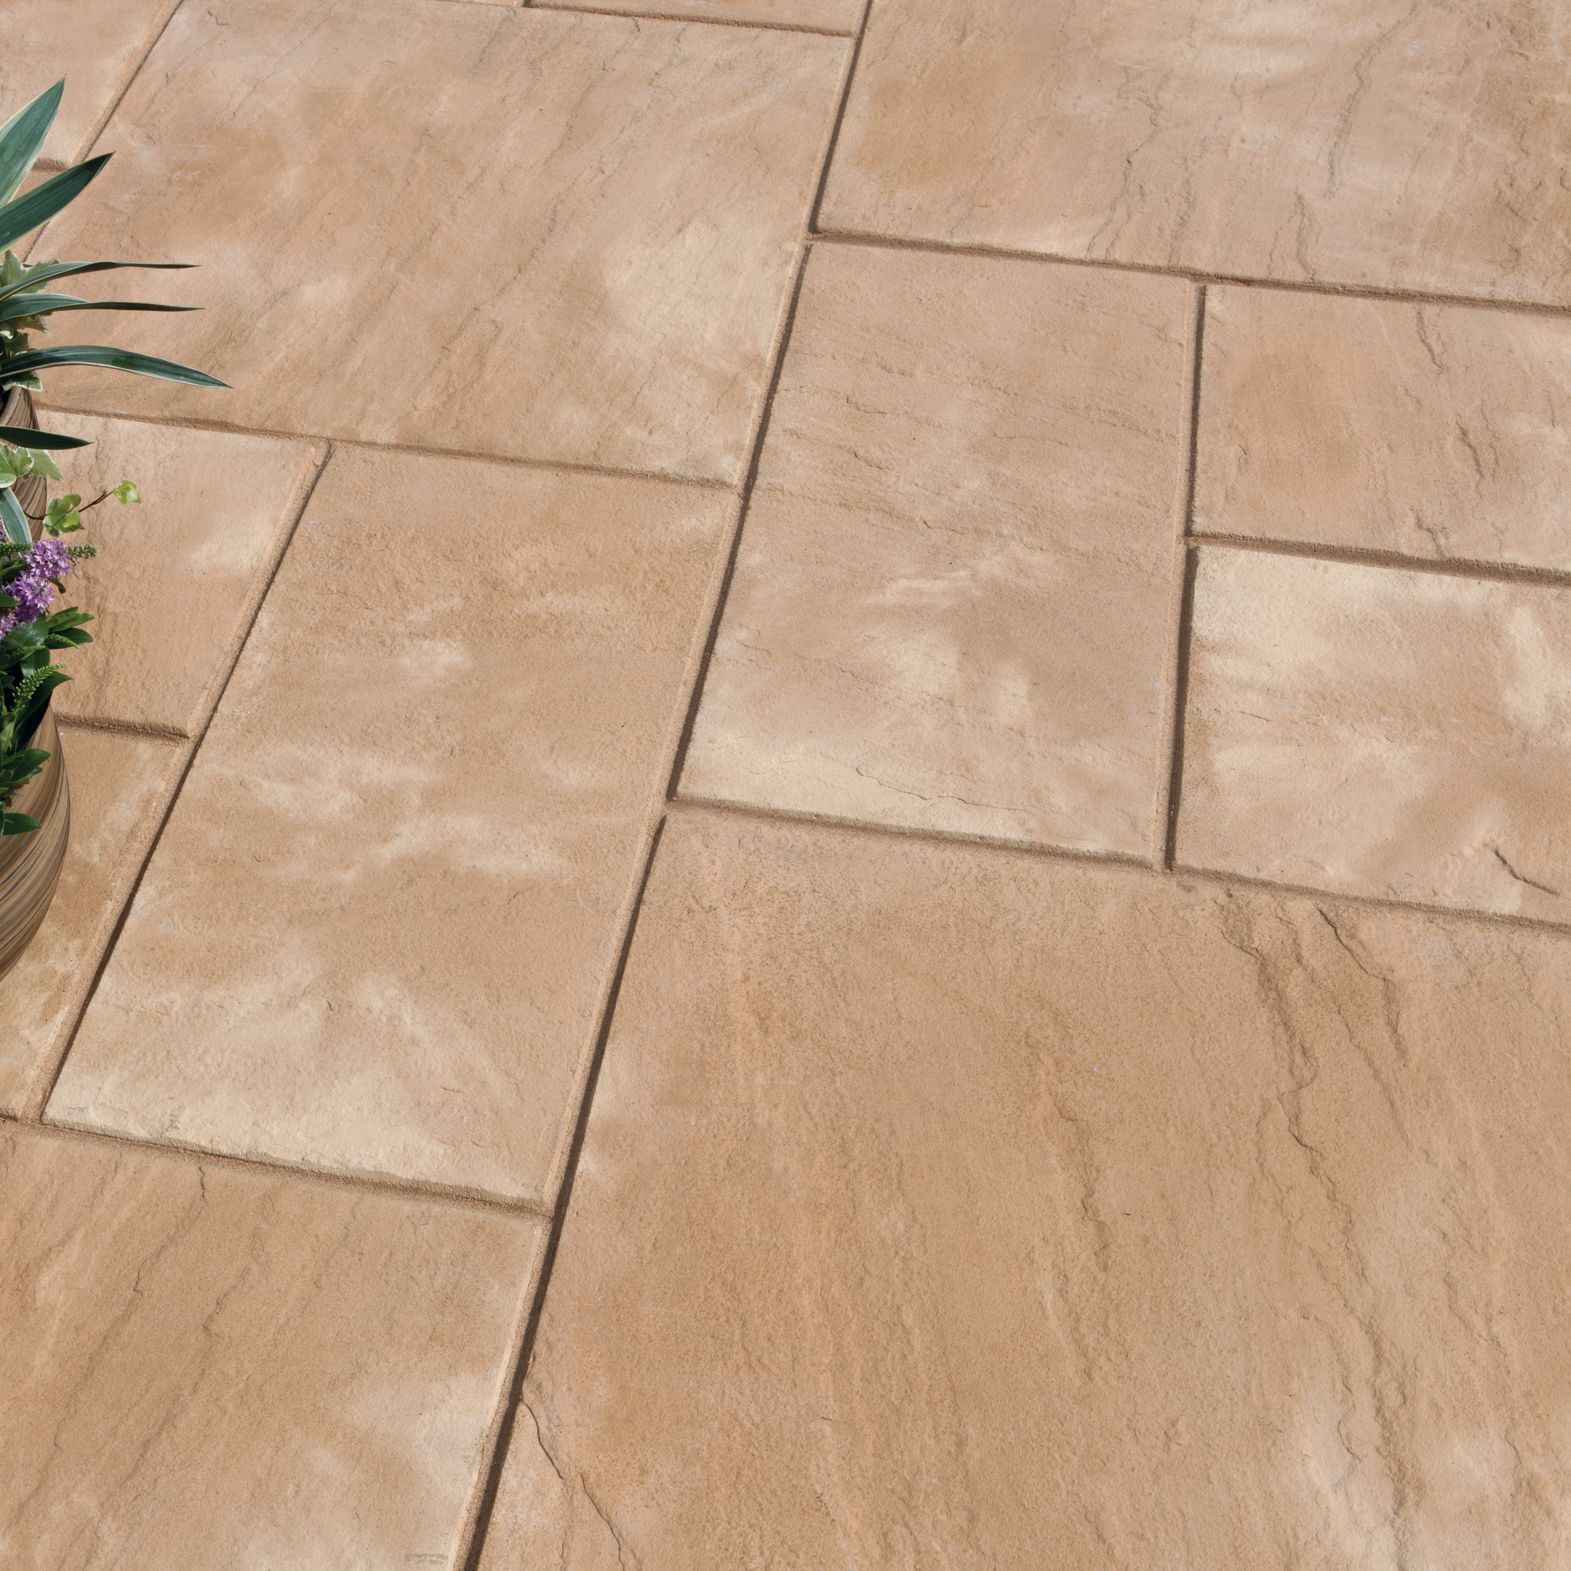 Bradstone Old riven Autumn cotswold Reconstituted stone Paving set, 5.25m² Pack of 23